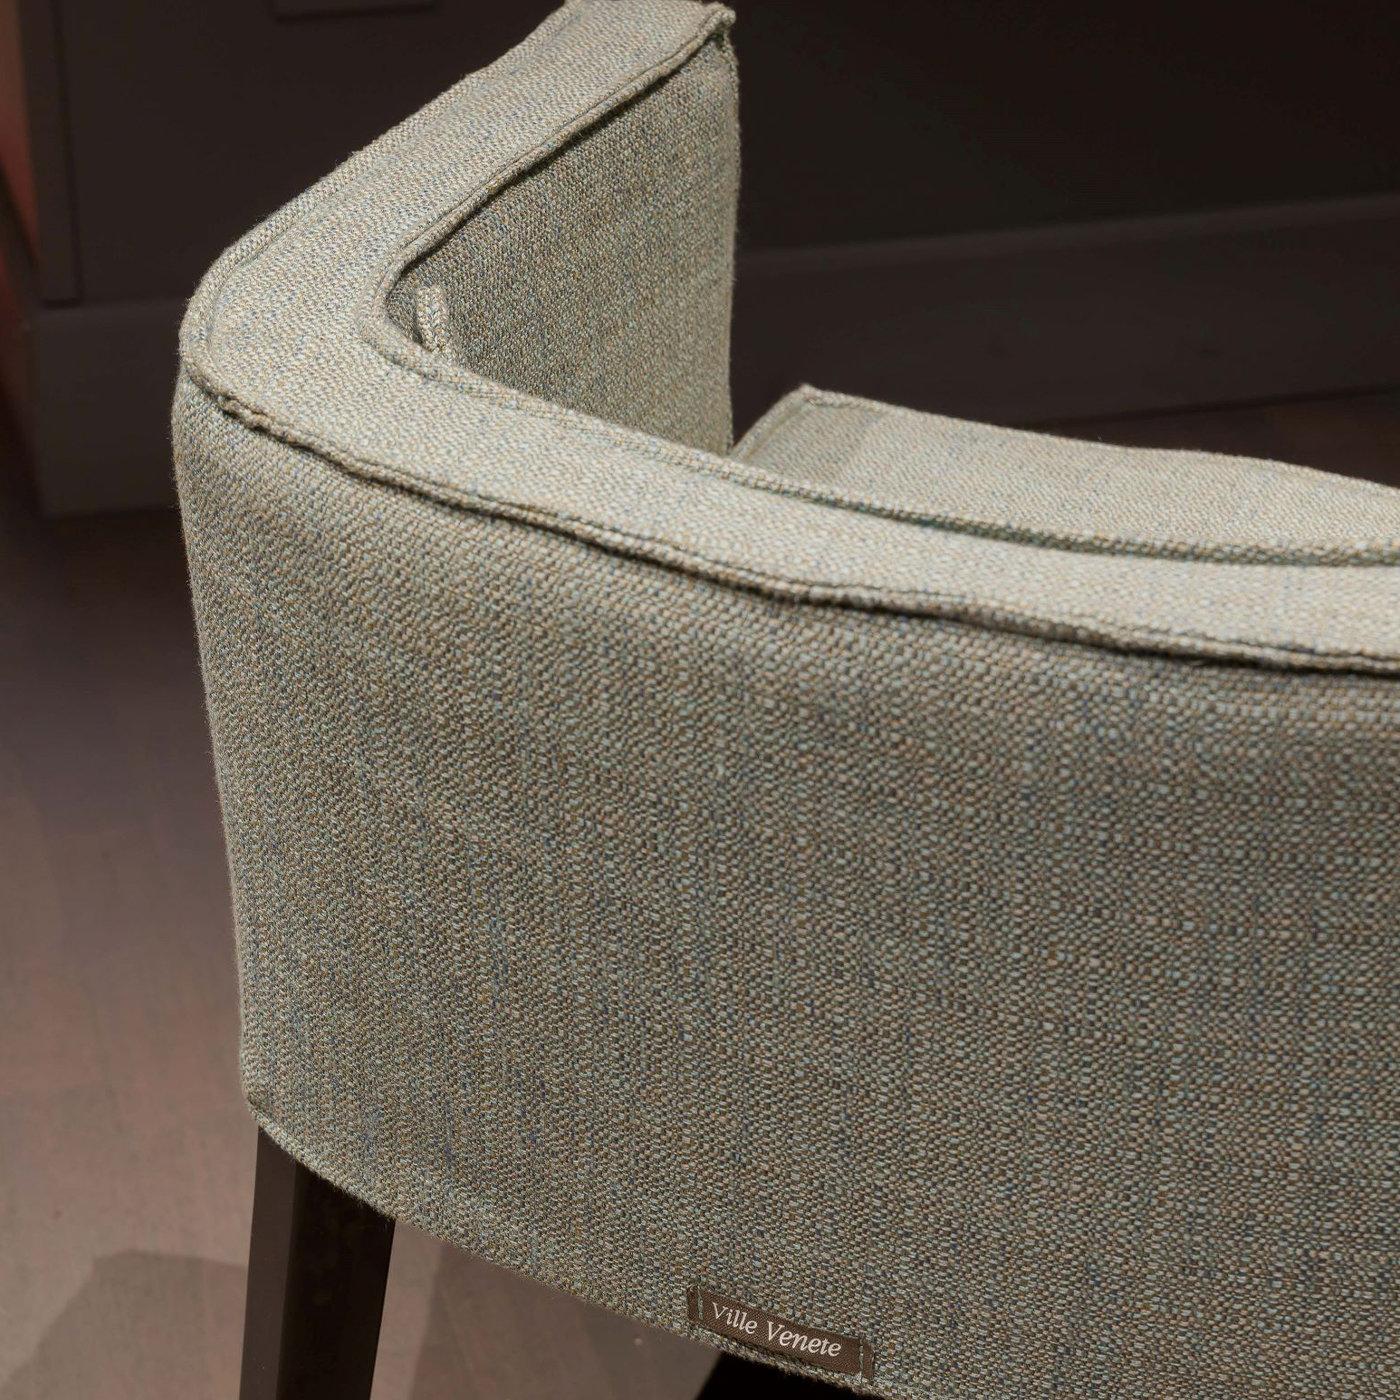 Perfect in residential or commercial contexts alike alongside a coffee table, this armchair is sure to impress. The sturdy wooden frame features a U-shaped backrest/armrests wholly upholstered in a textured gray fabric also used as a cover for the